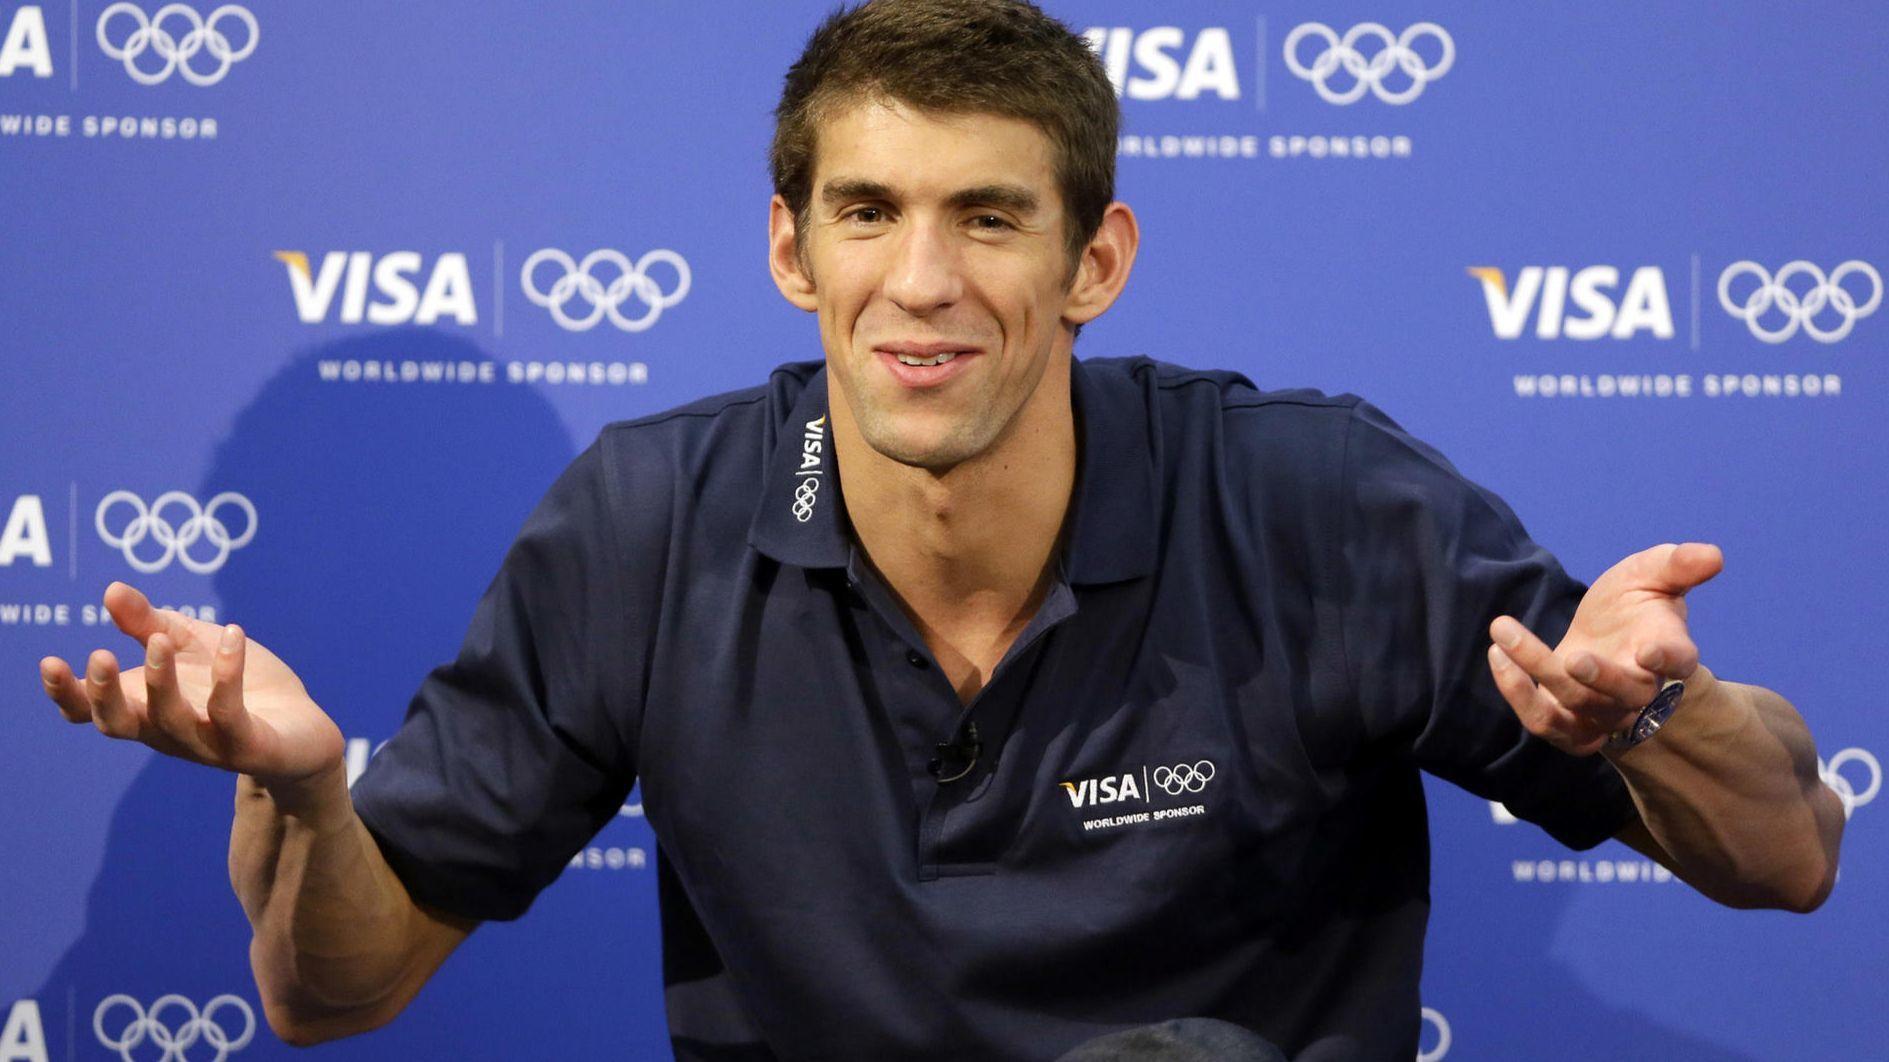 USAs Michael Phelps stands on the podium after winning 